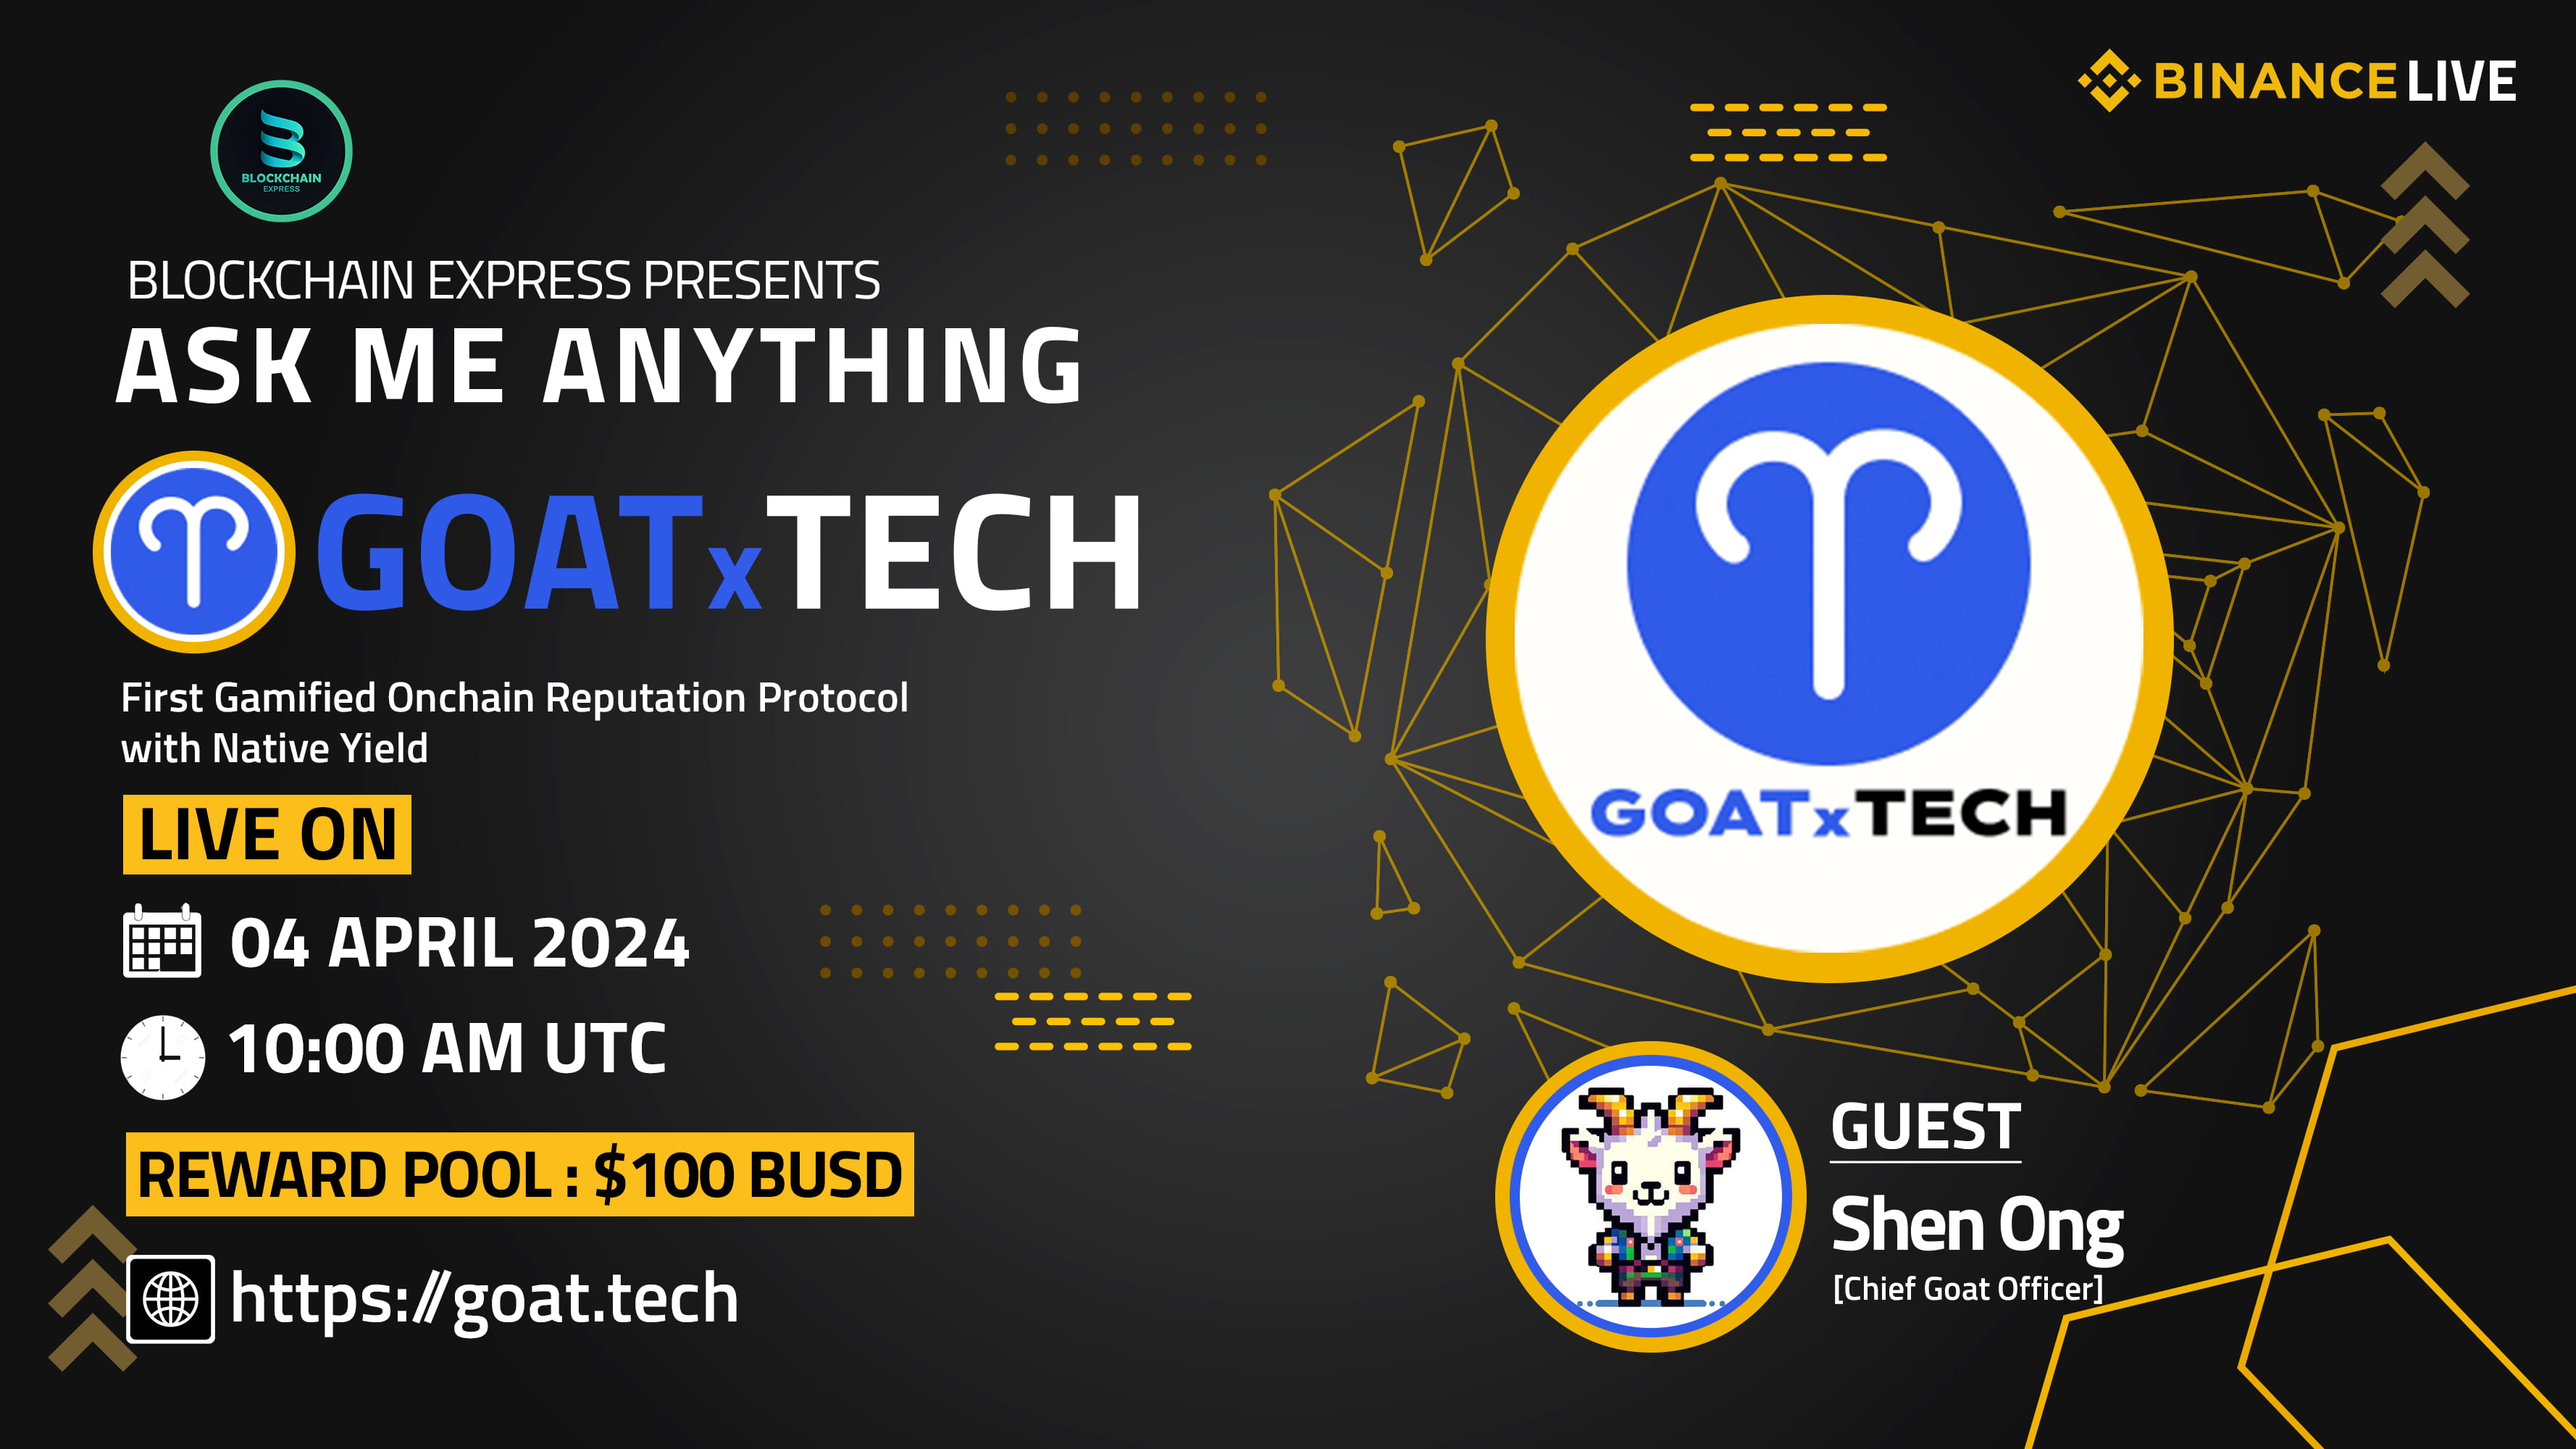 ₿lockchain Express will be hosting an AMA session with" Goat.Tech "